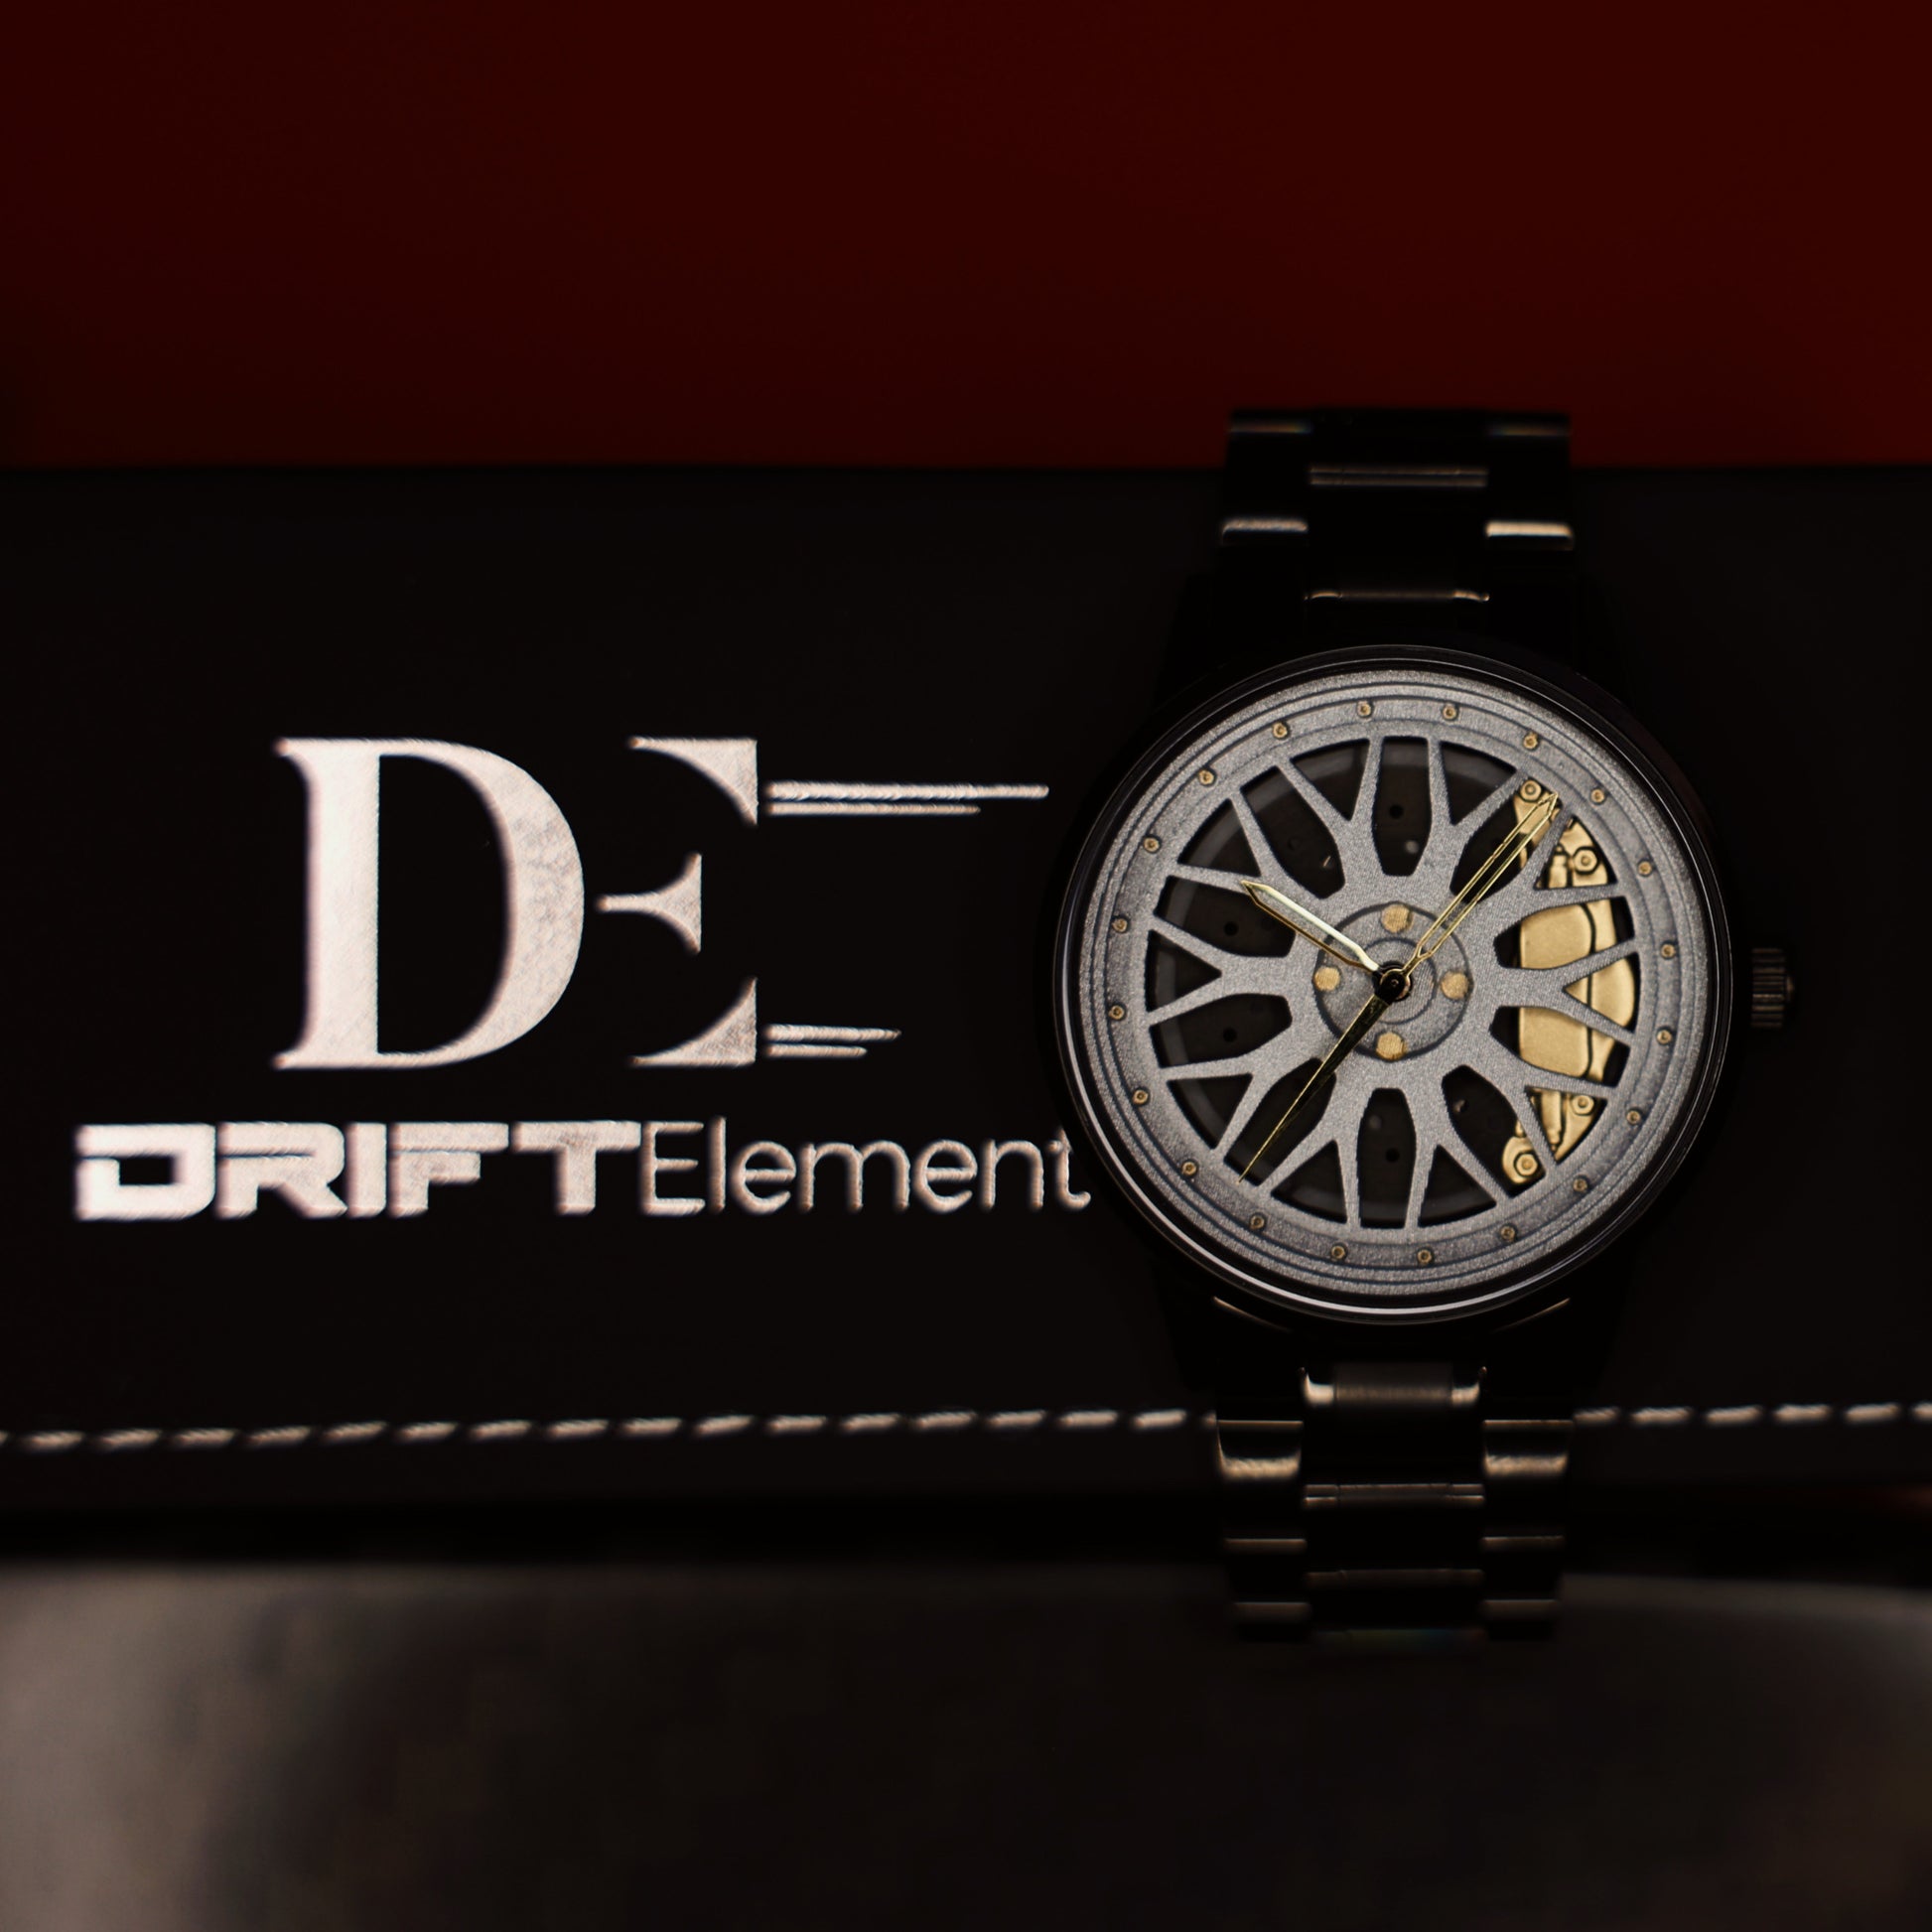 An elegant DriftElement Final Edition watch displaying a sophisticated rim design on its face, indicative of the brand's innovative German engineering. The watch rests against a background with the DriftElement logo, highlighting its status as a flagship piece from the startup's collection.